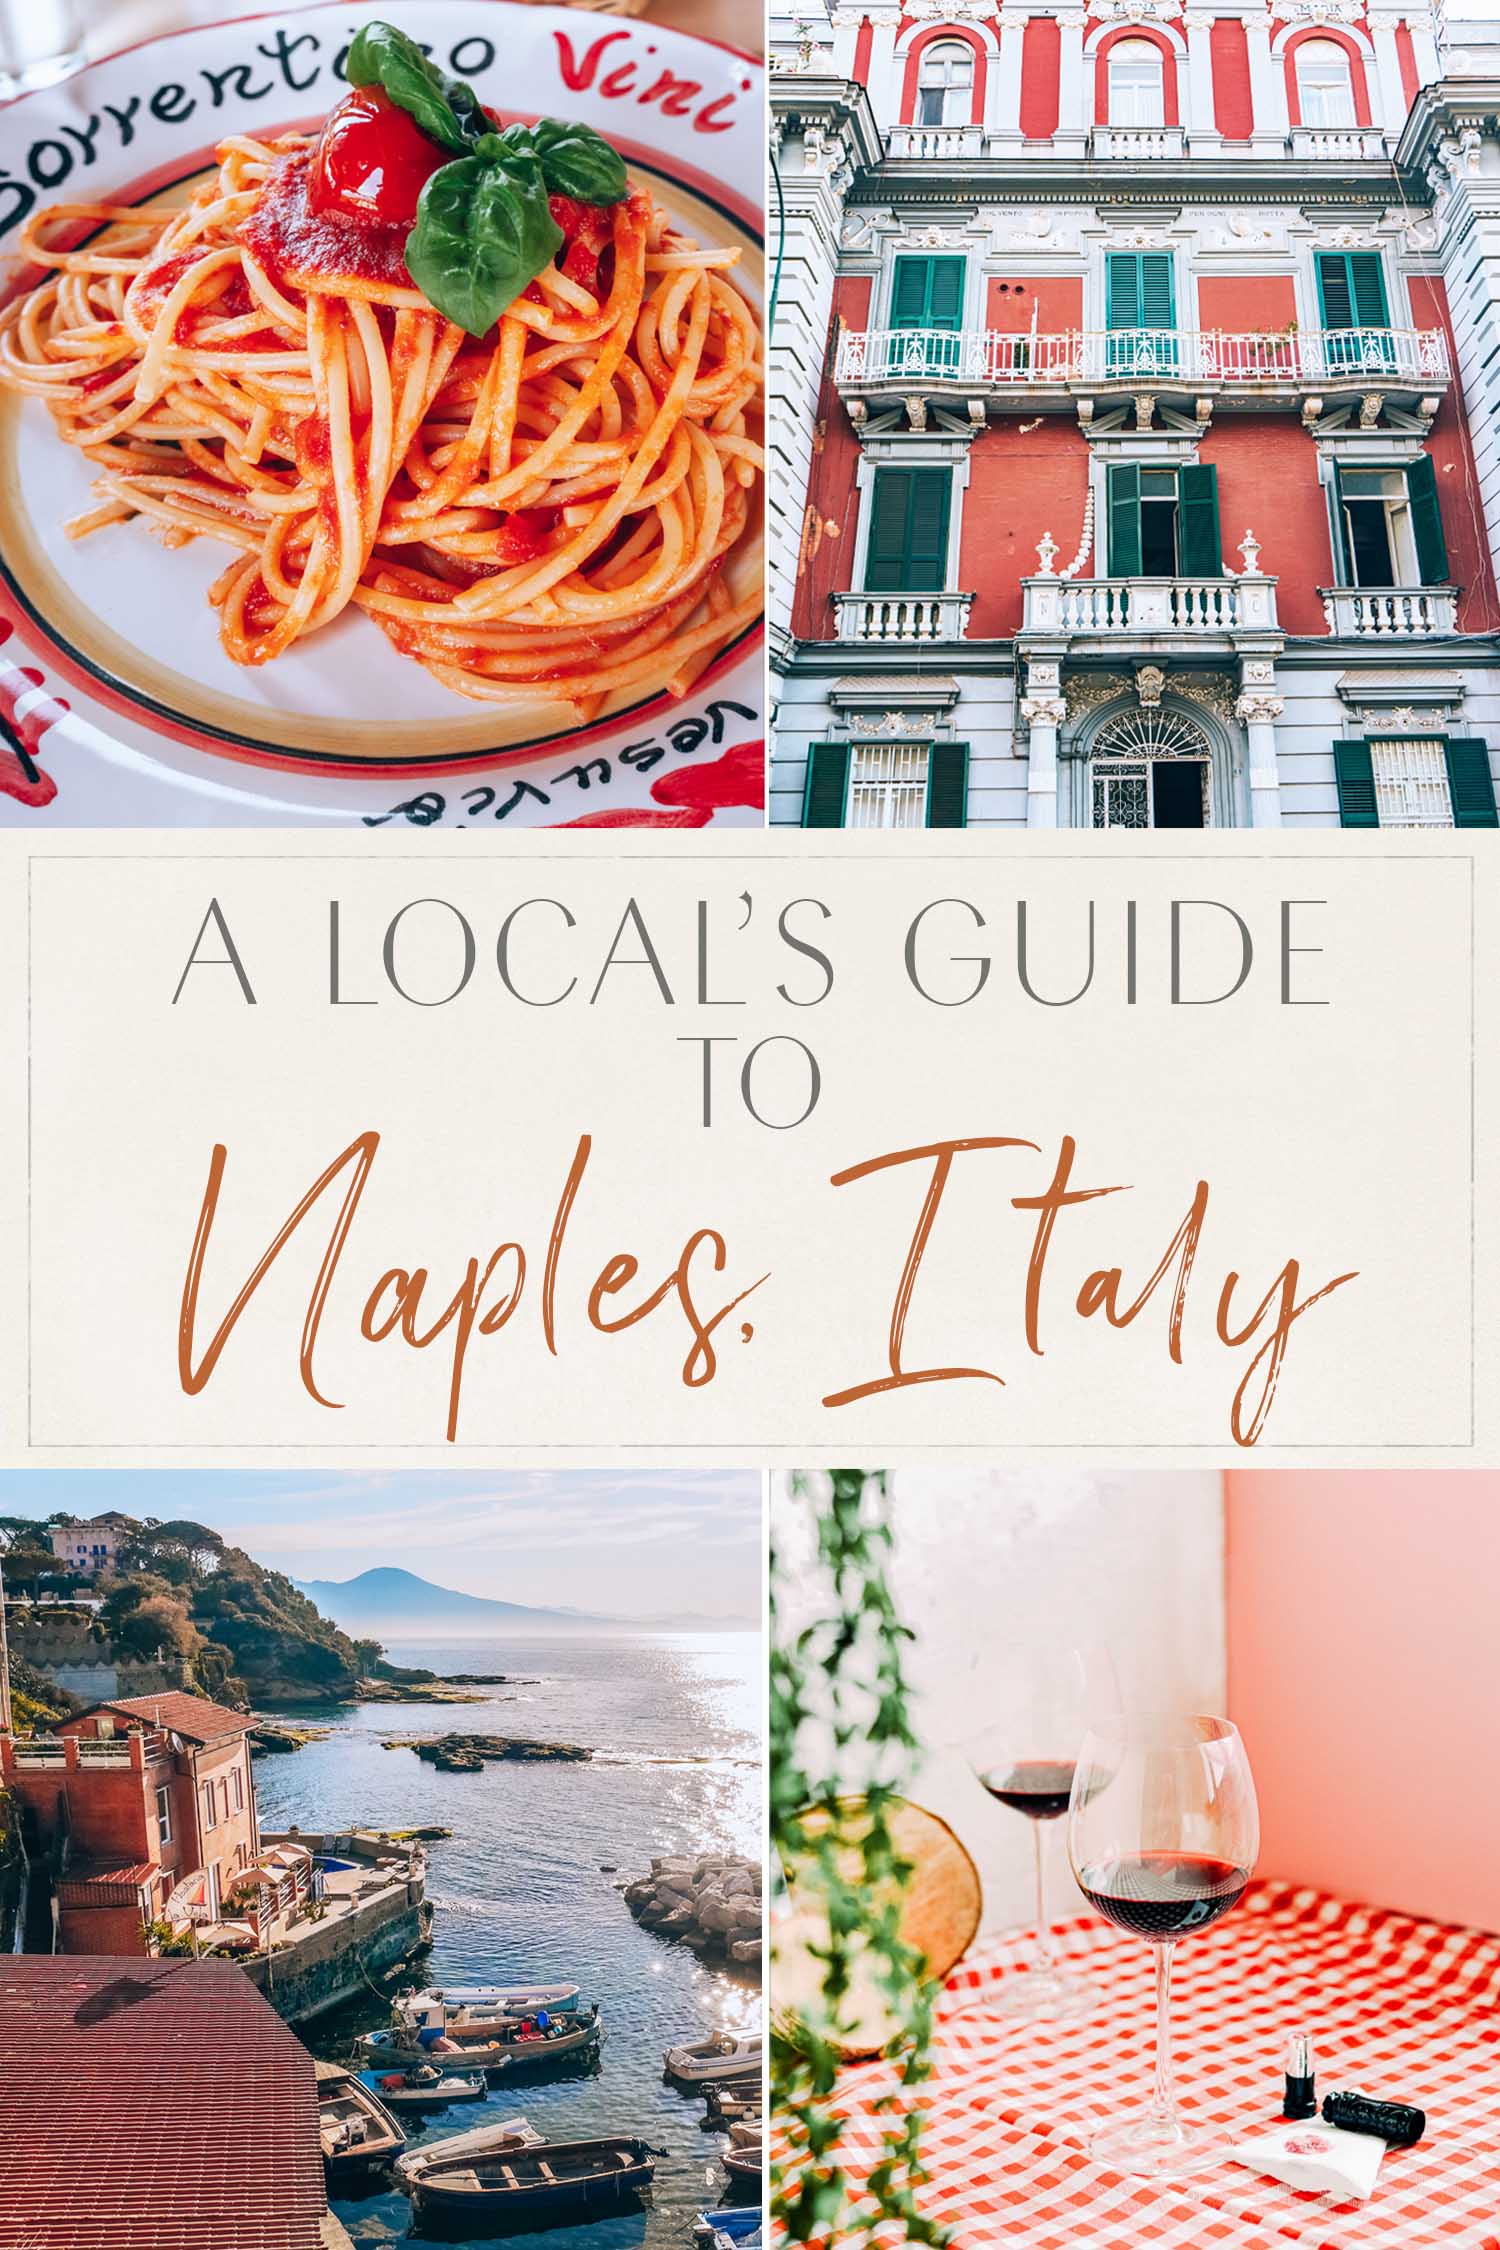 Local's Guide to Naples, Italy